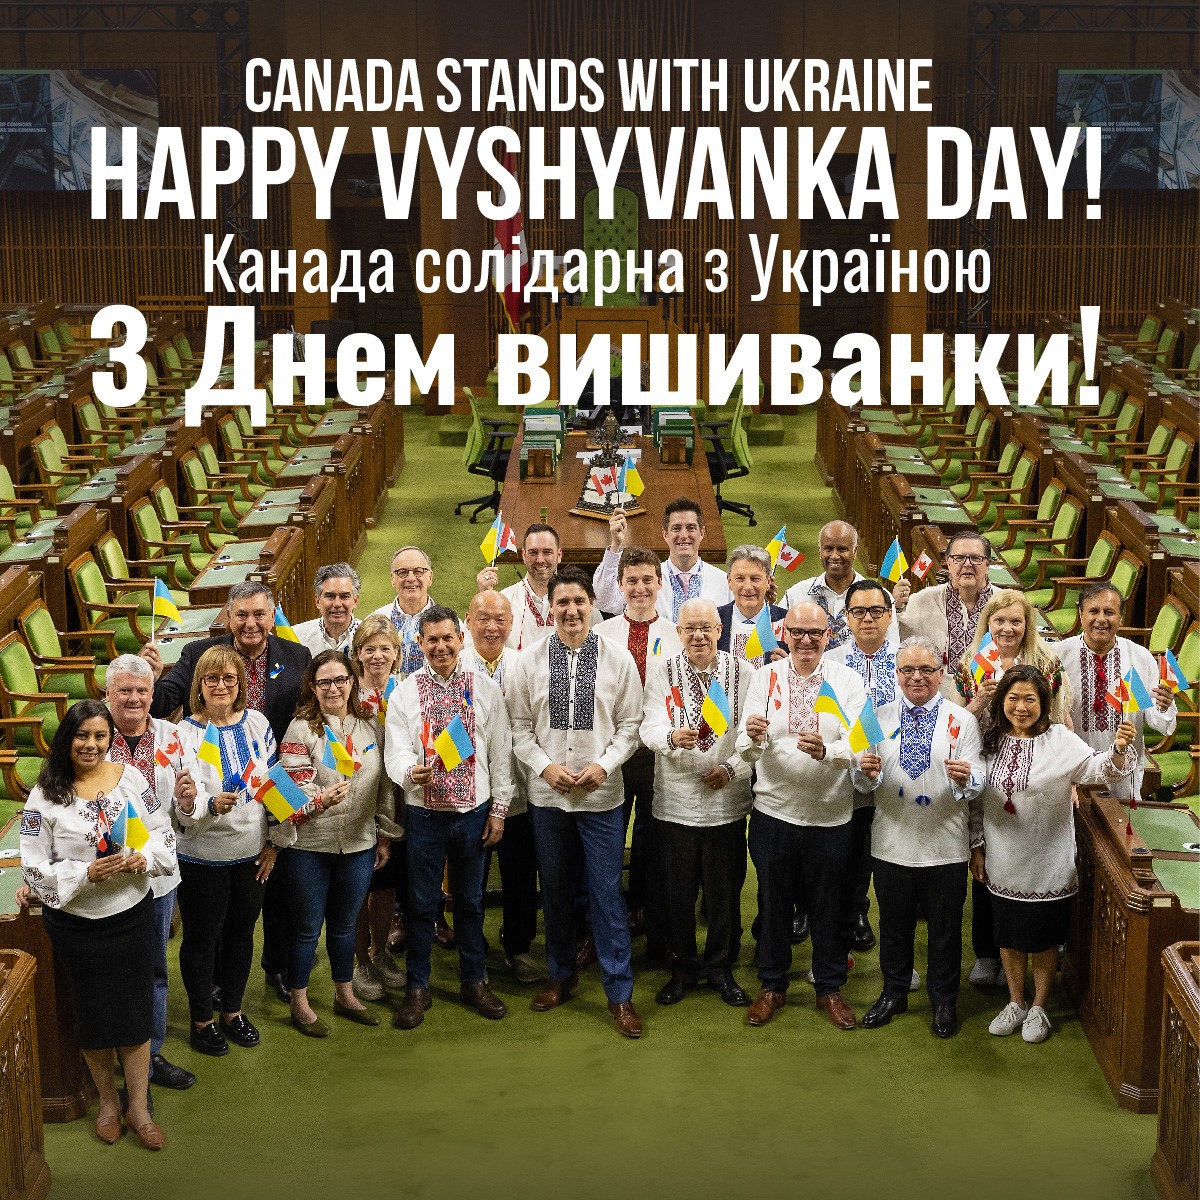 Today, we wear Vyshyvankas to show our support for Ukrainians, who continue to demonstrate remarkable resiliency and courage. Canada will always stand with Ukraine as they fight for their sovereignty and the democratic values that our countries share. #VyshyvankaDay